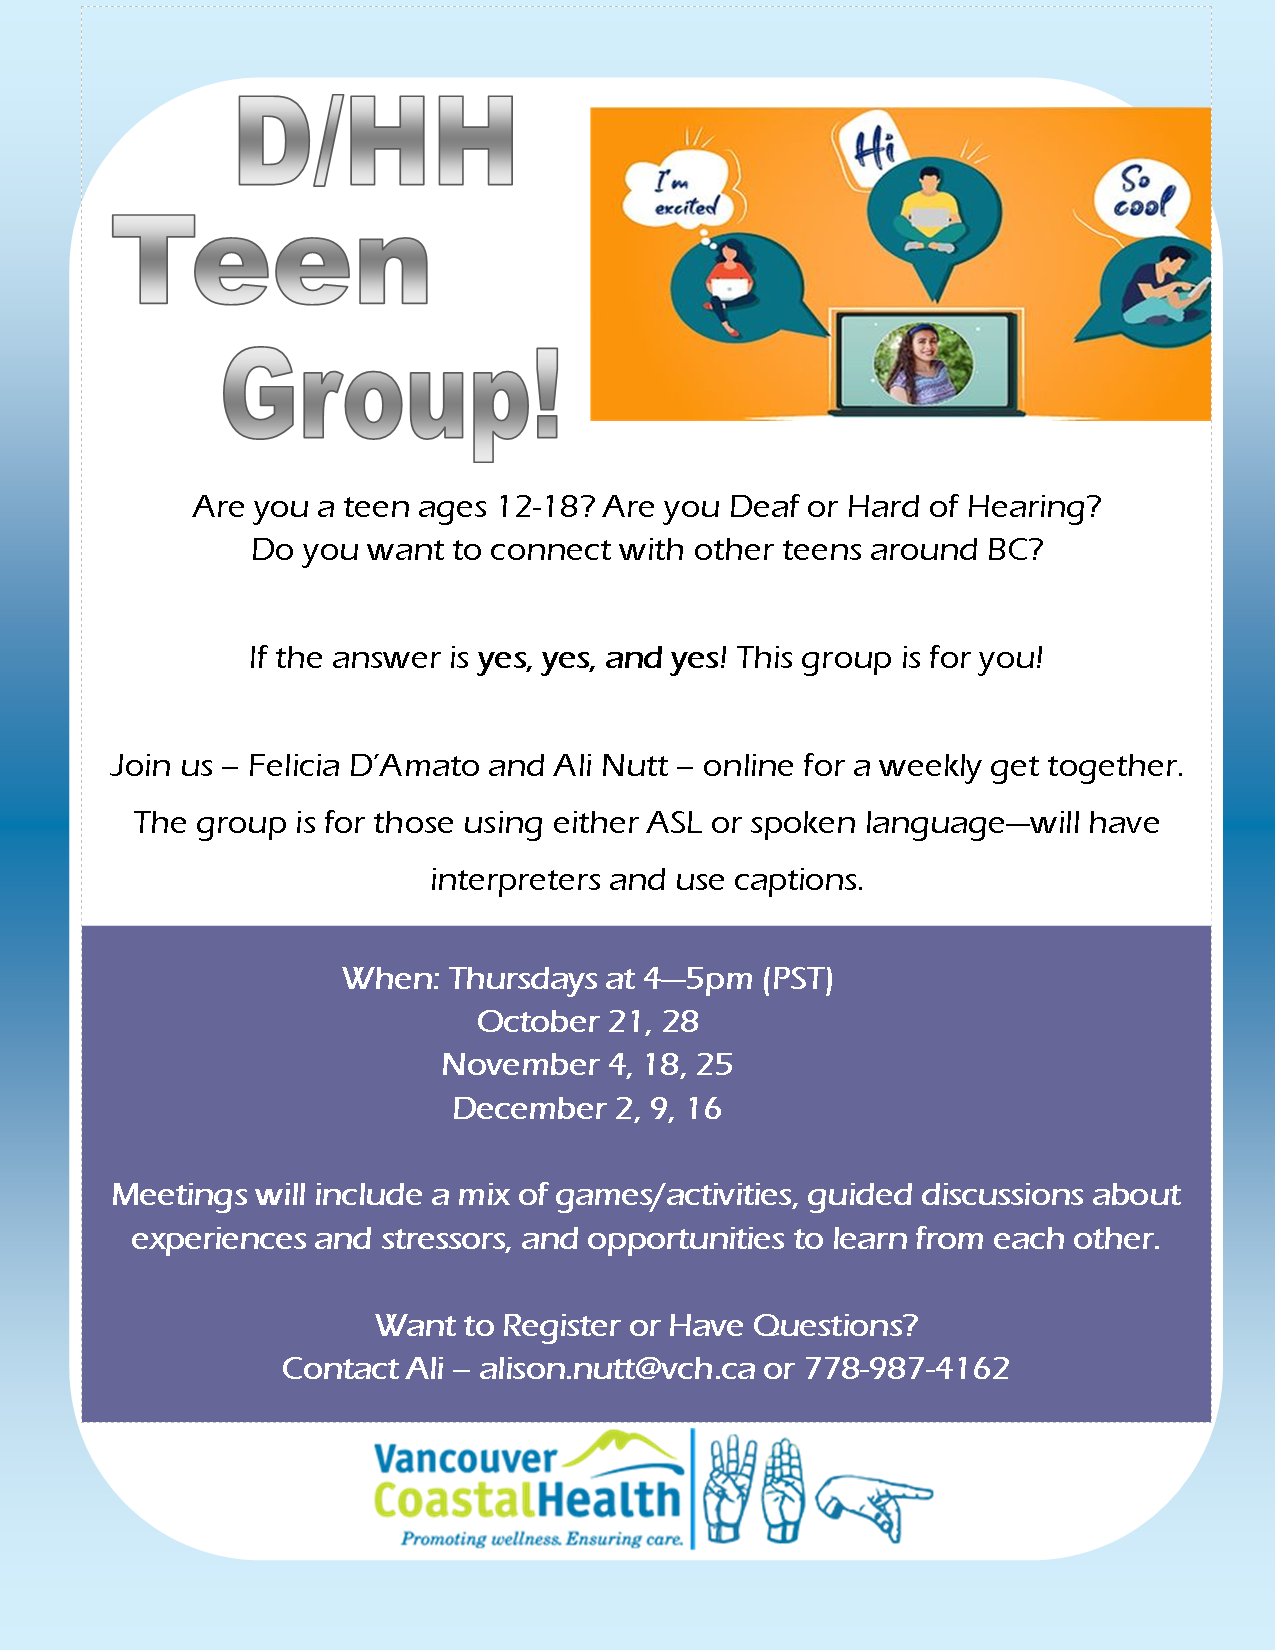 Flyer about Deaf and Hard of Hearing Teen Group